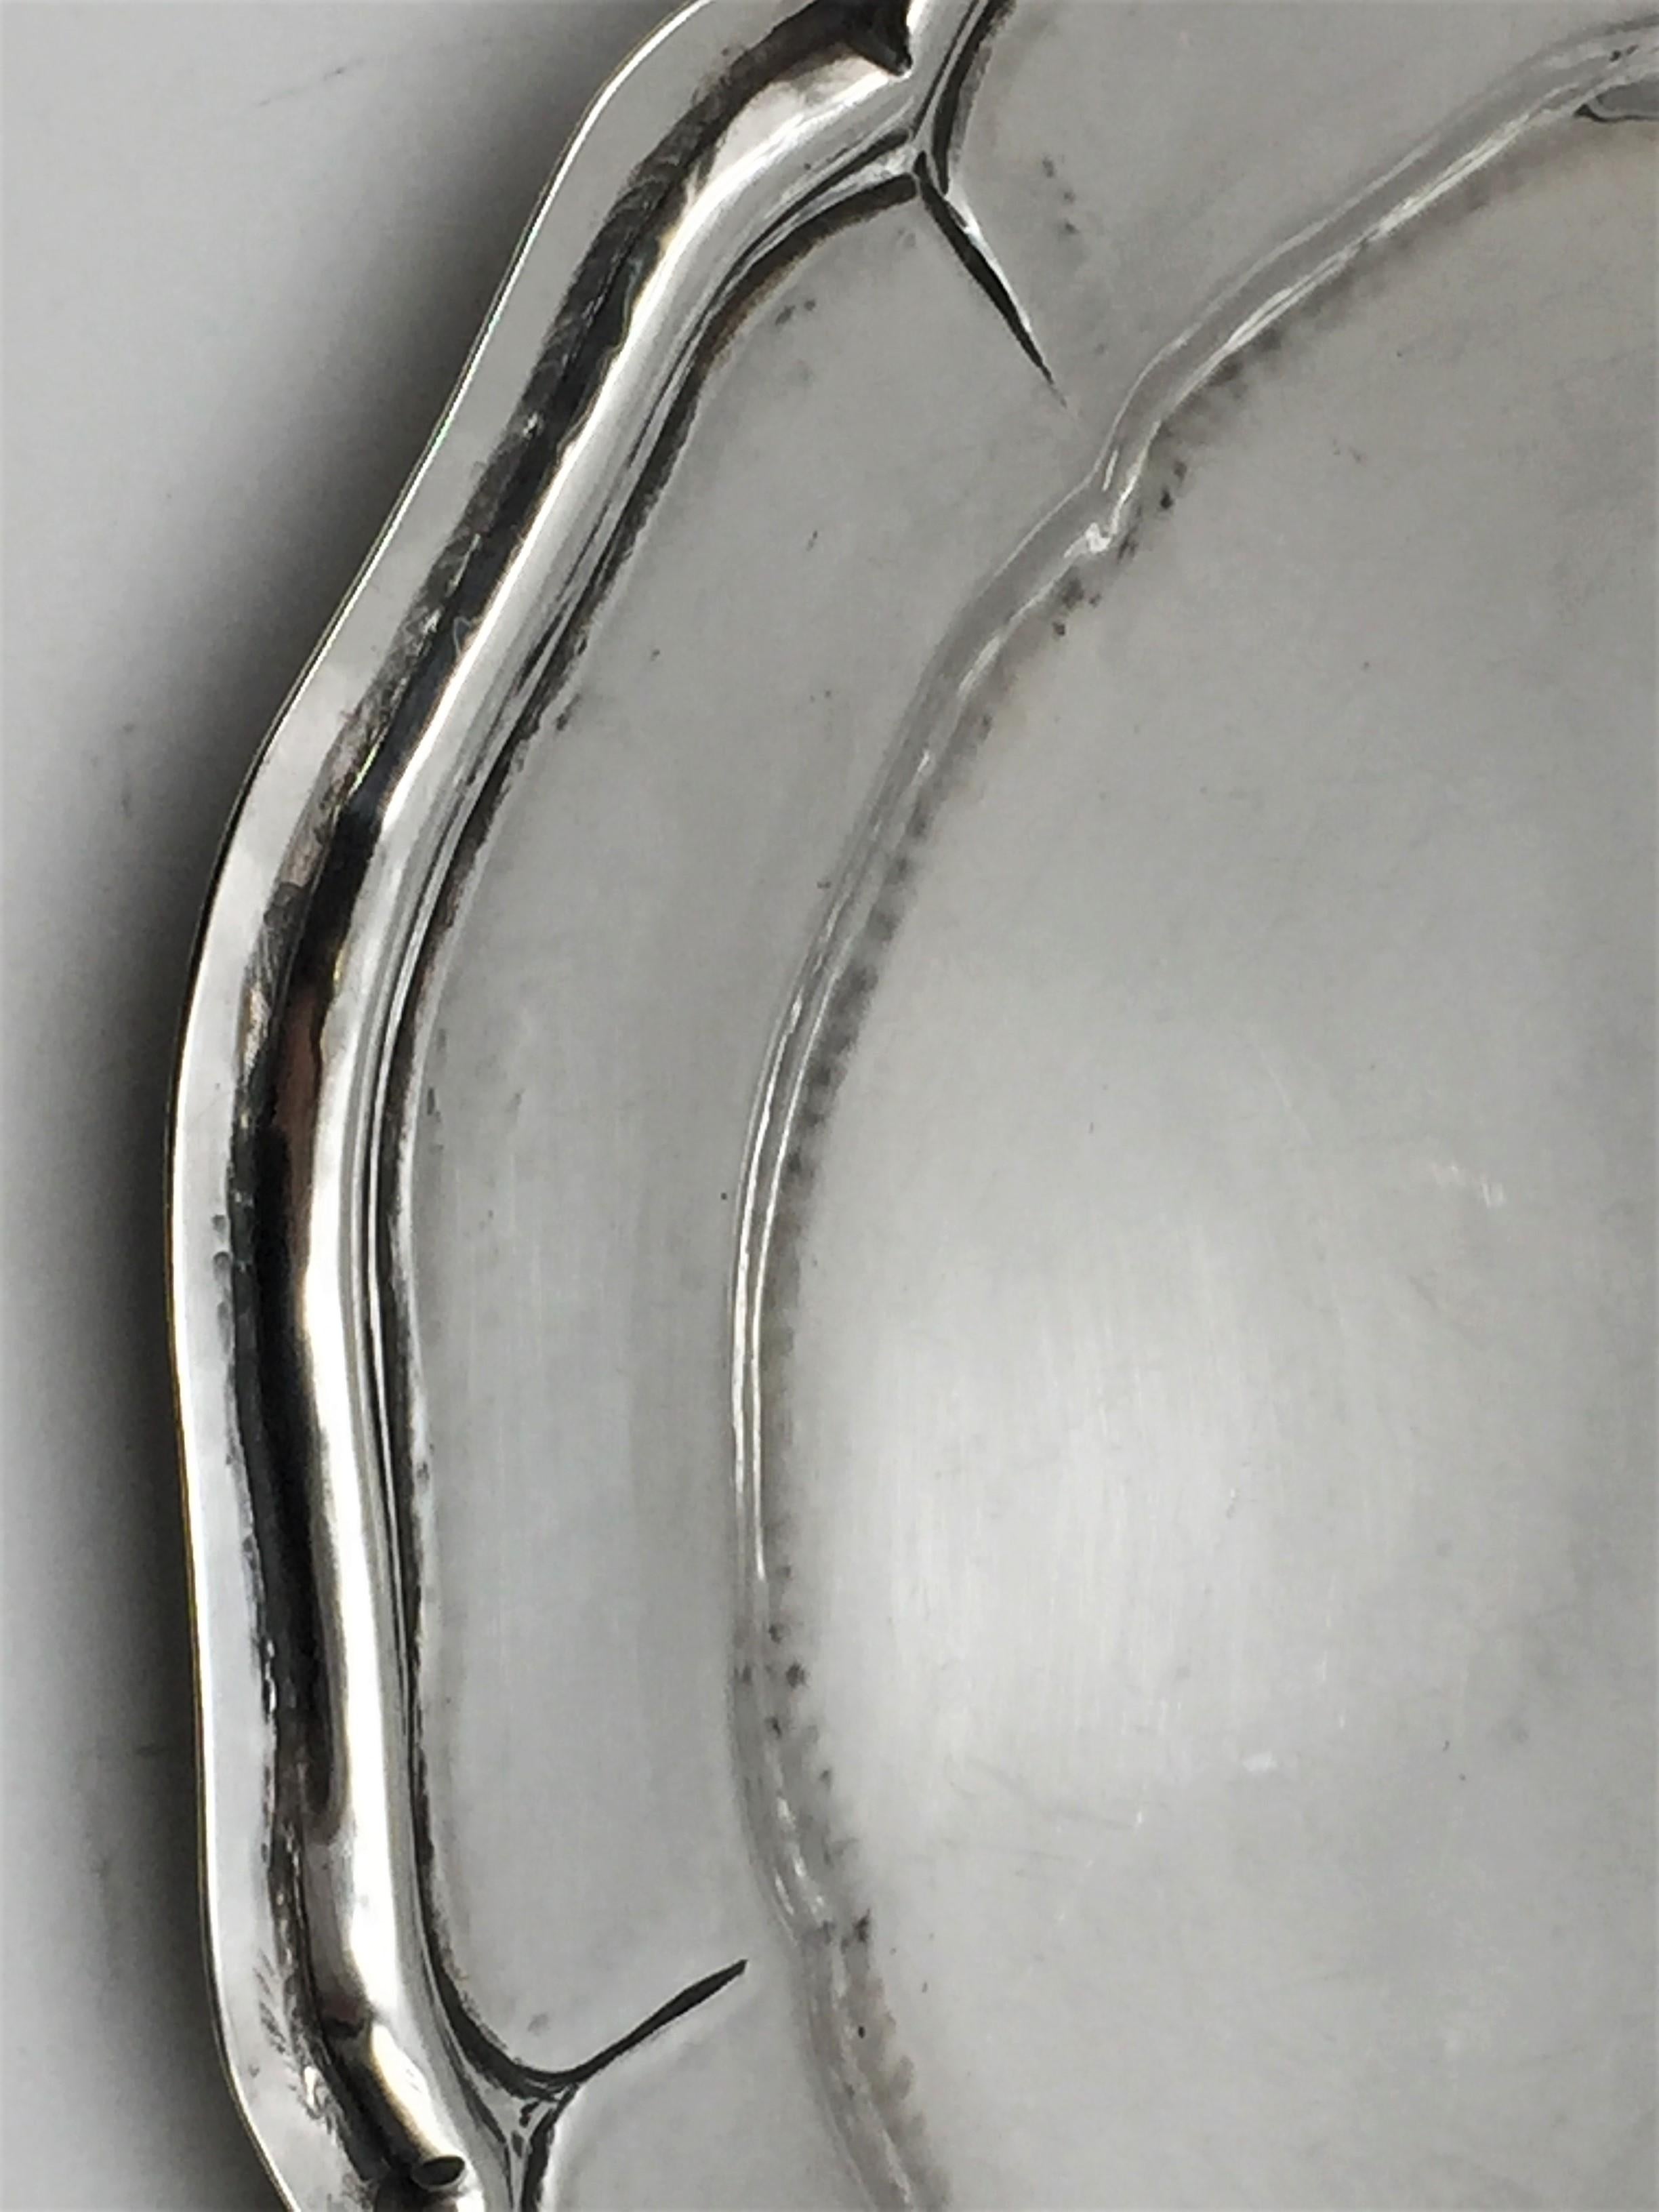 Beautiful set of 11 Buccellati sterling silver dessert plates with a wave shaped rim. Made in Italy. A great gift and addition to one's home and collection. Measuring 7 ½” in diameter by 1/3” in height and total weight is 58.6 ounces. Bearing